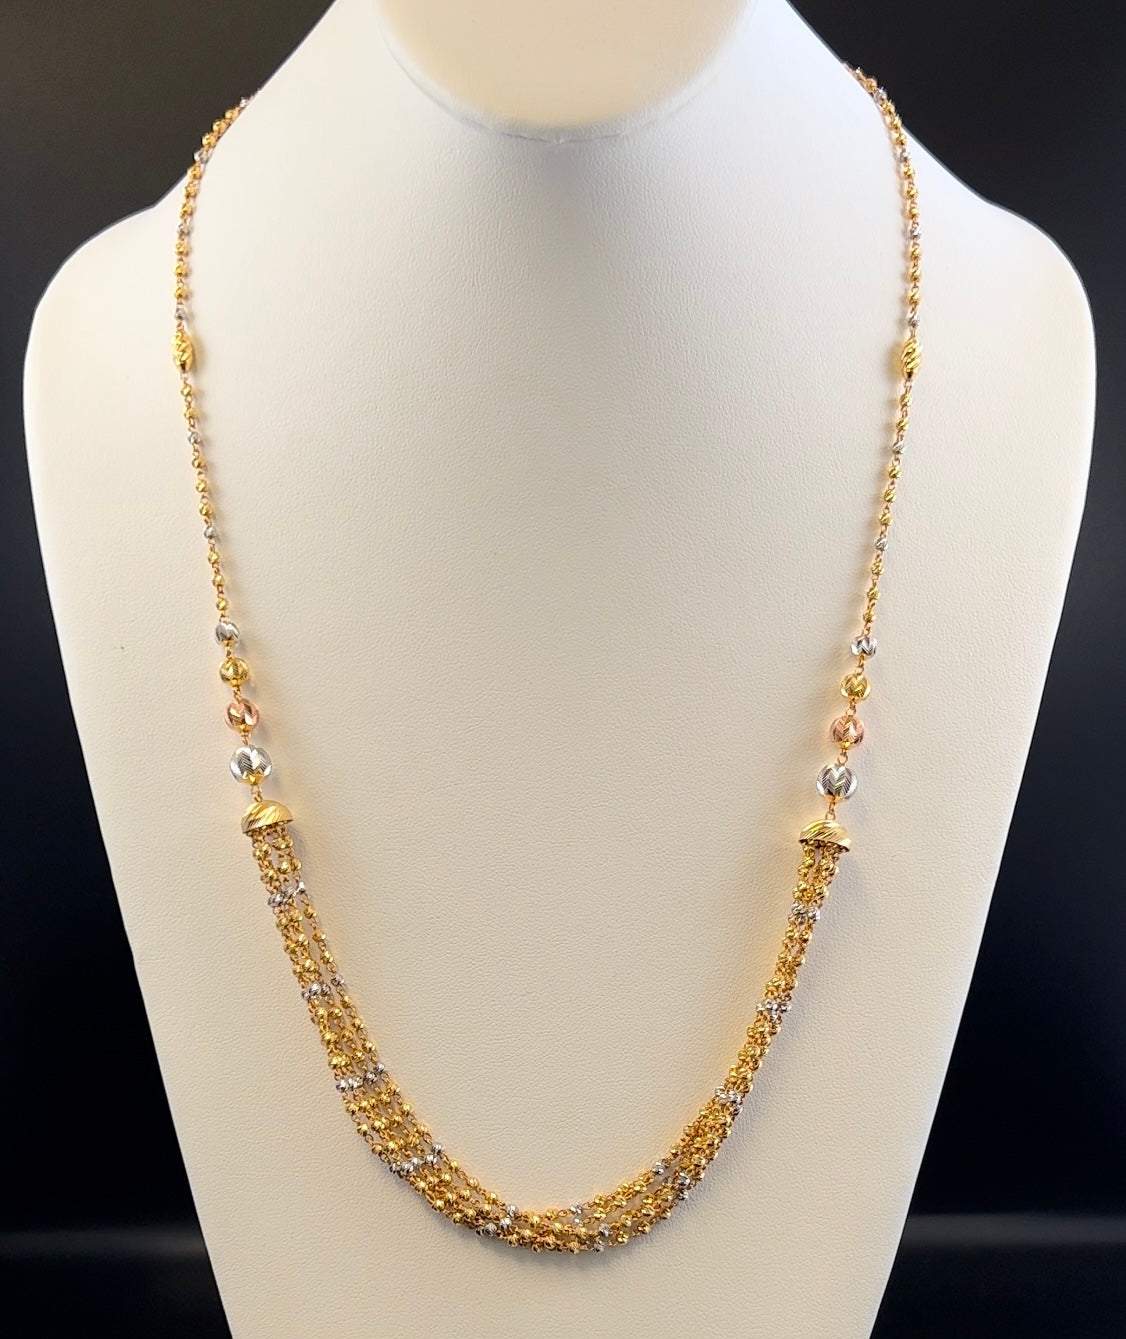 Golden Balls And Red Pearls Gold Plated Necklace Set - Runjhun Jewellery -  1841301